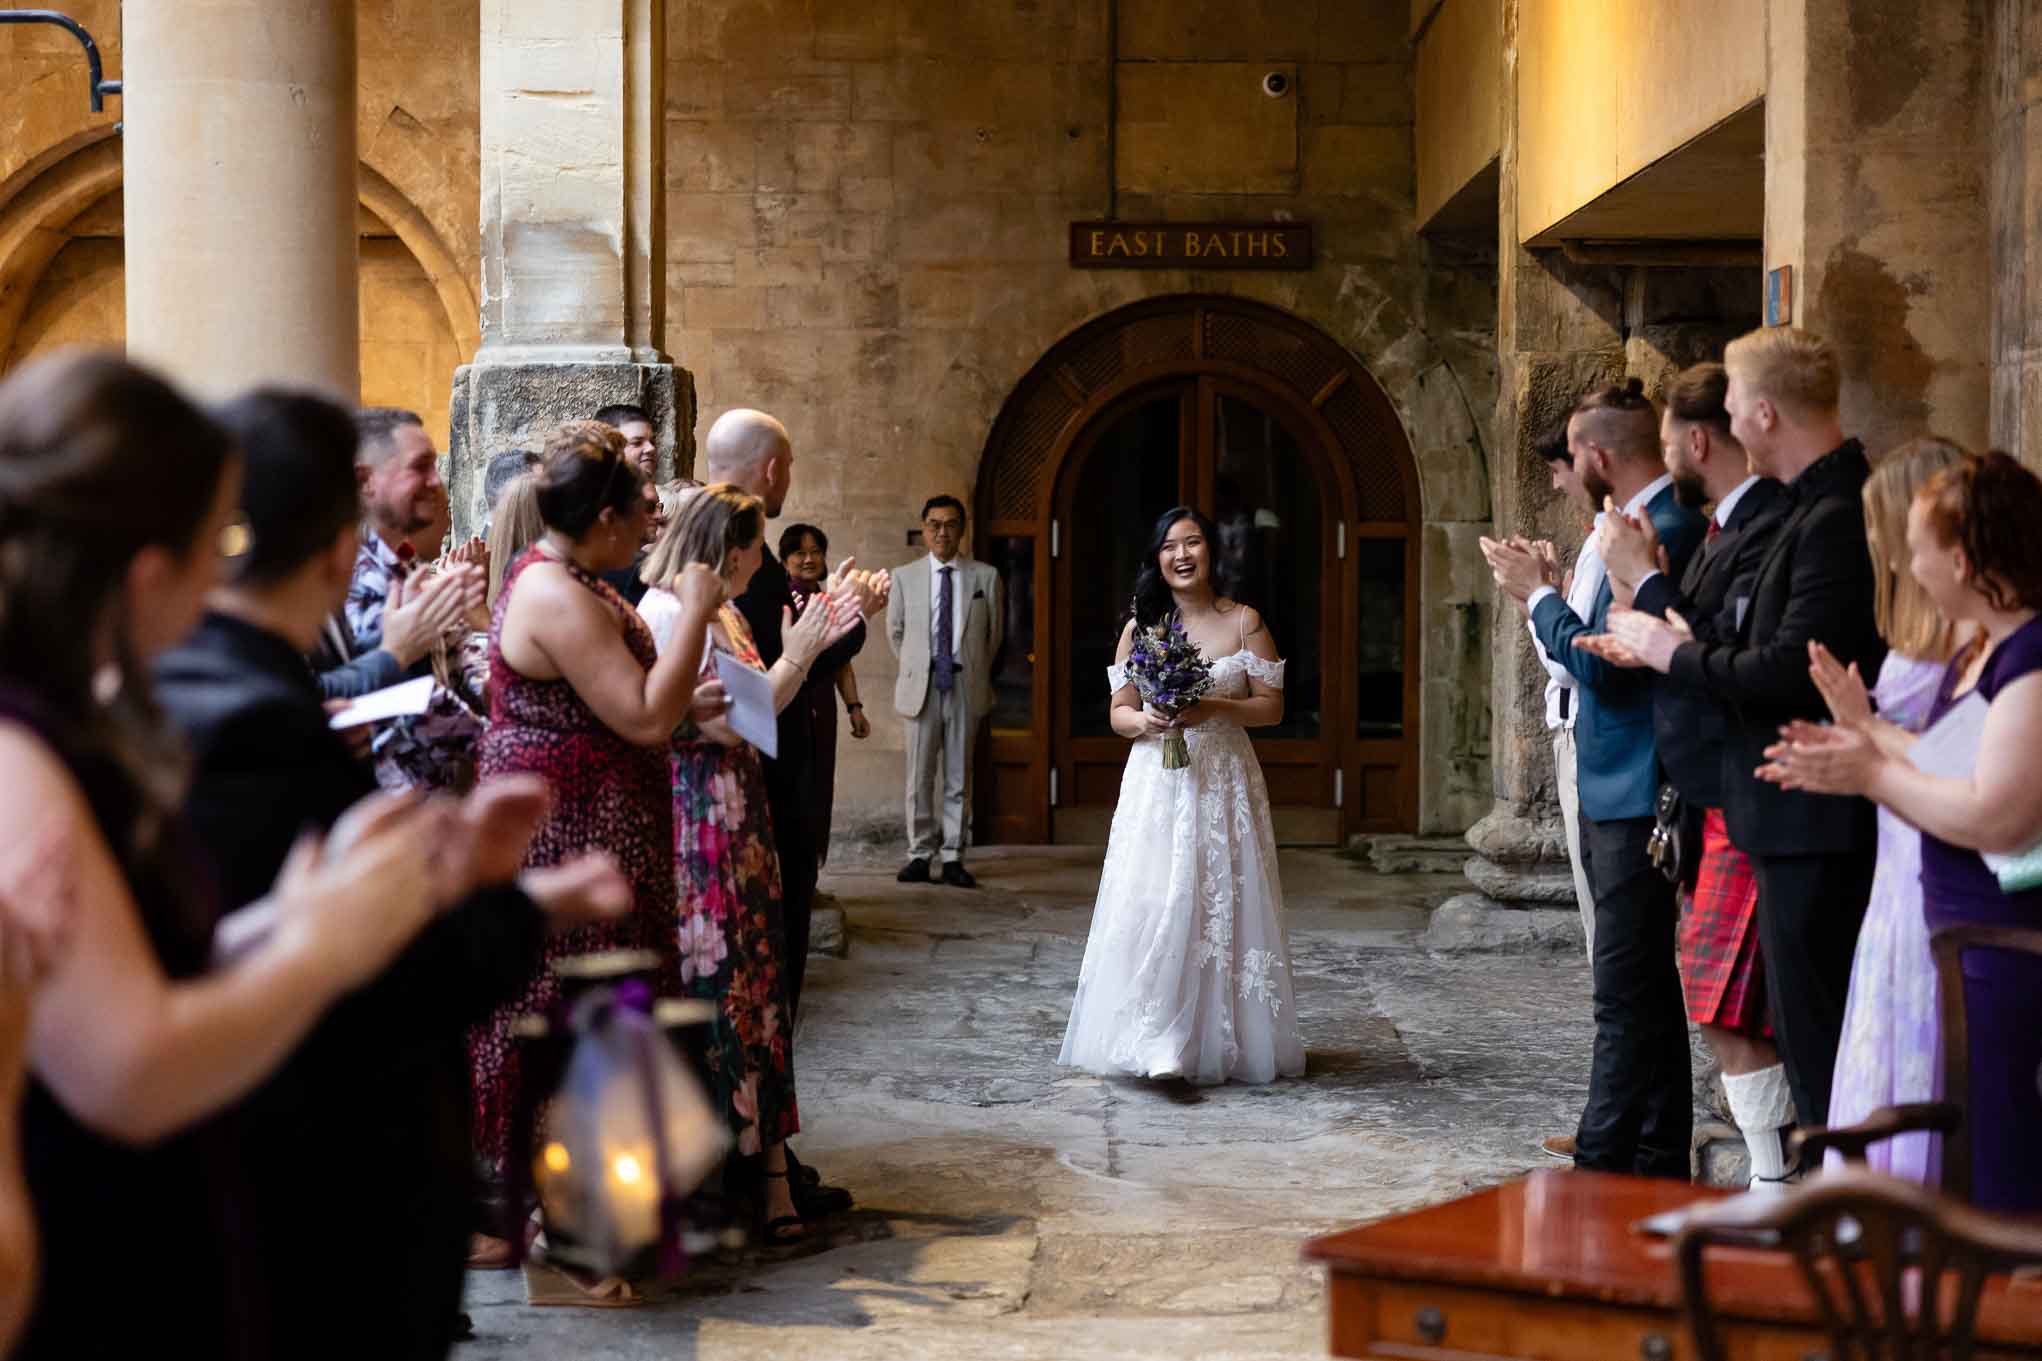 Bride arrives for ceremony beside the Great Bath